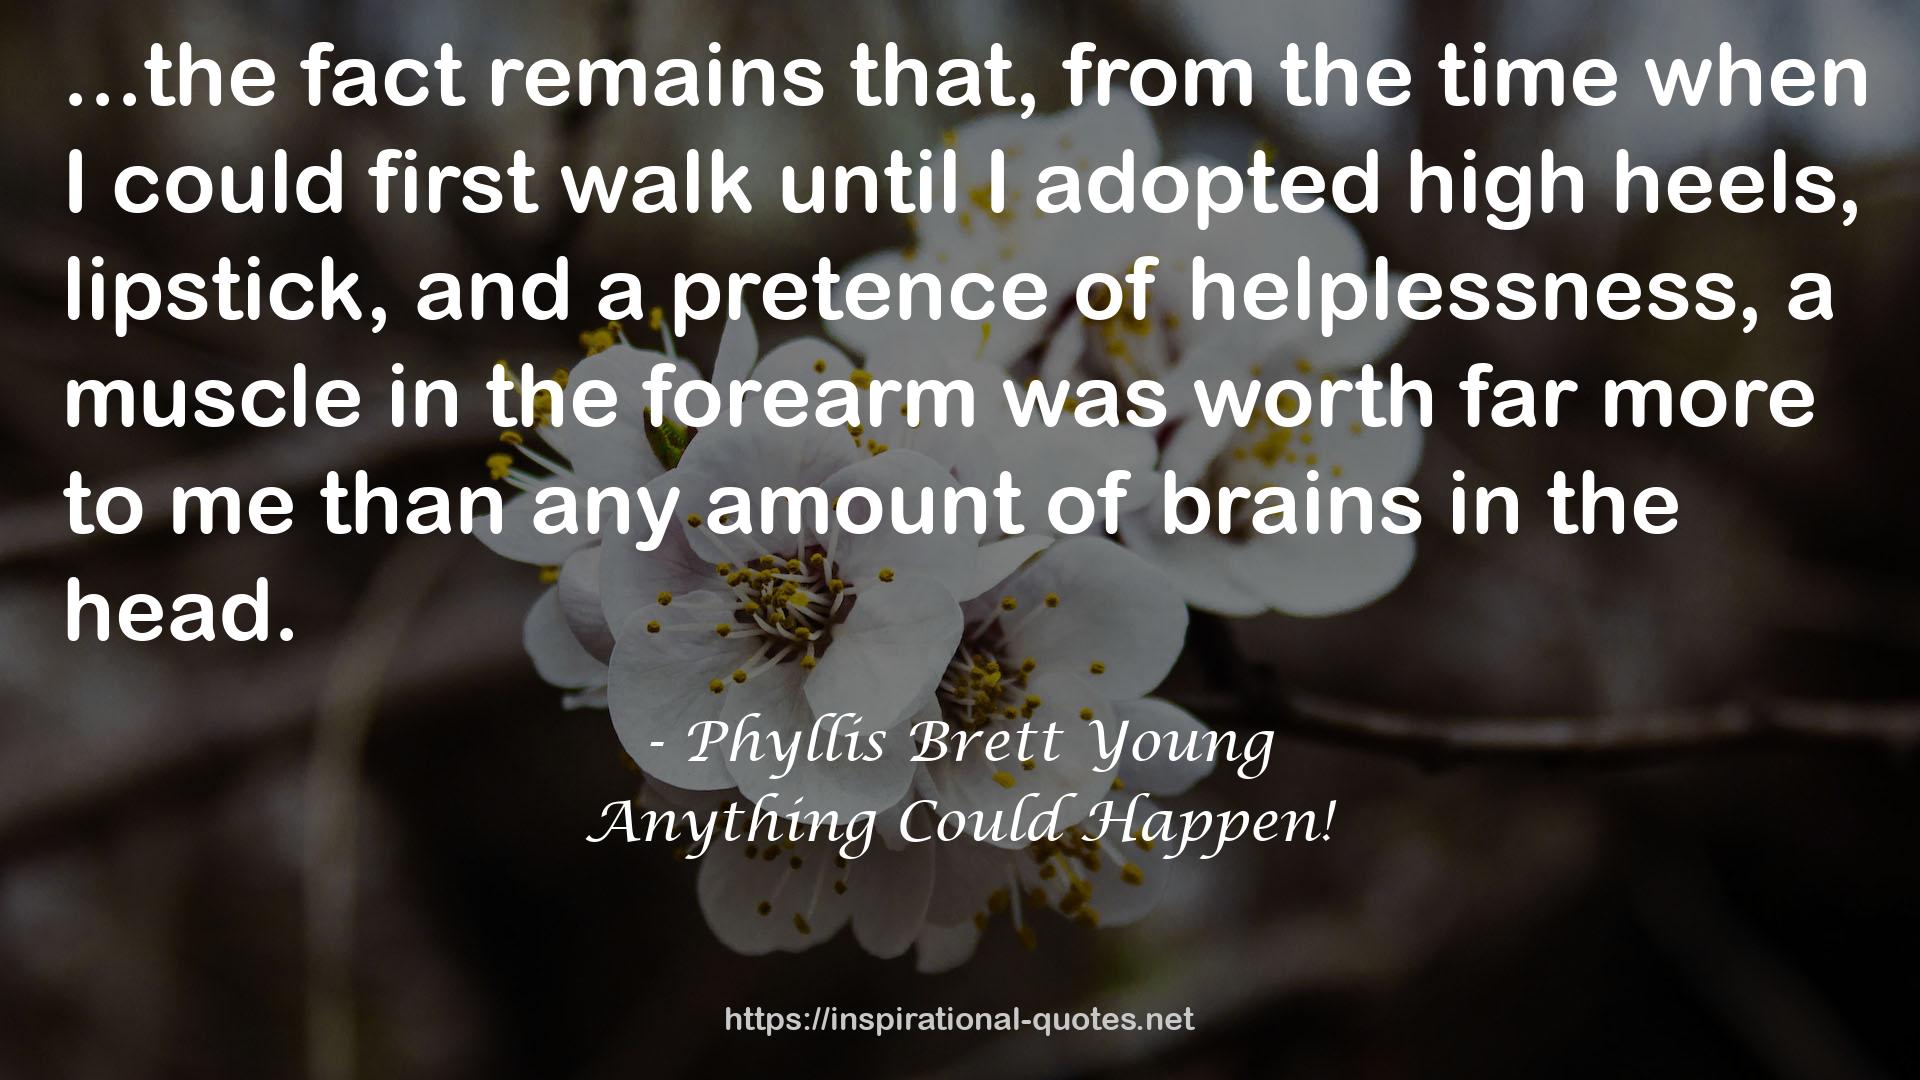 Phyllis Brett Young QUOTES